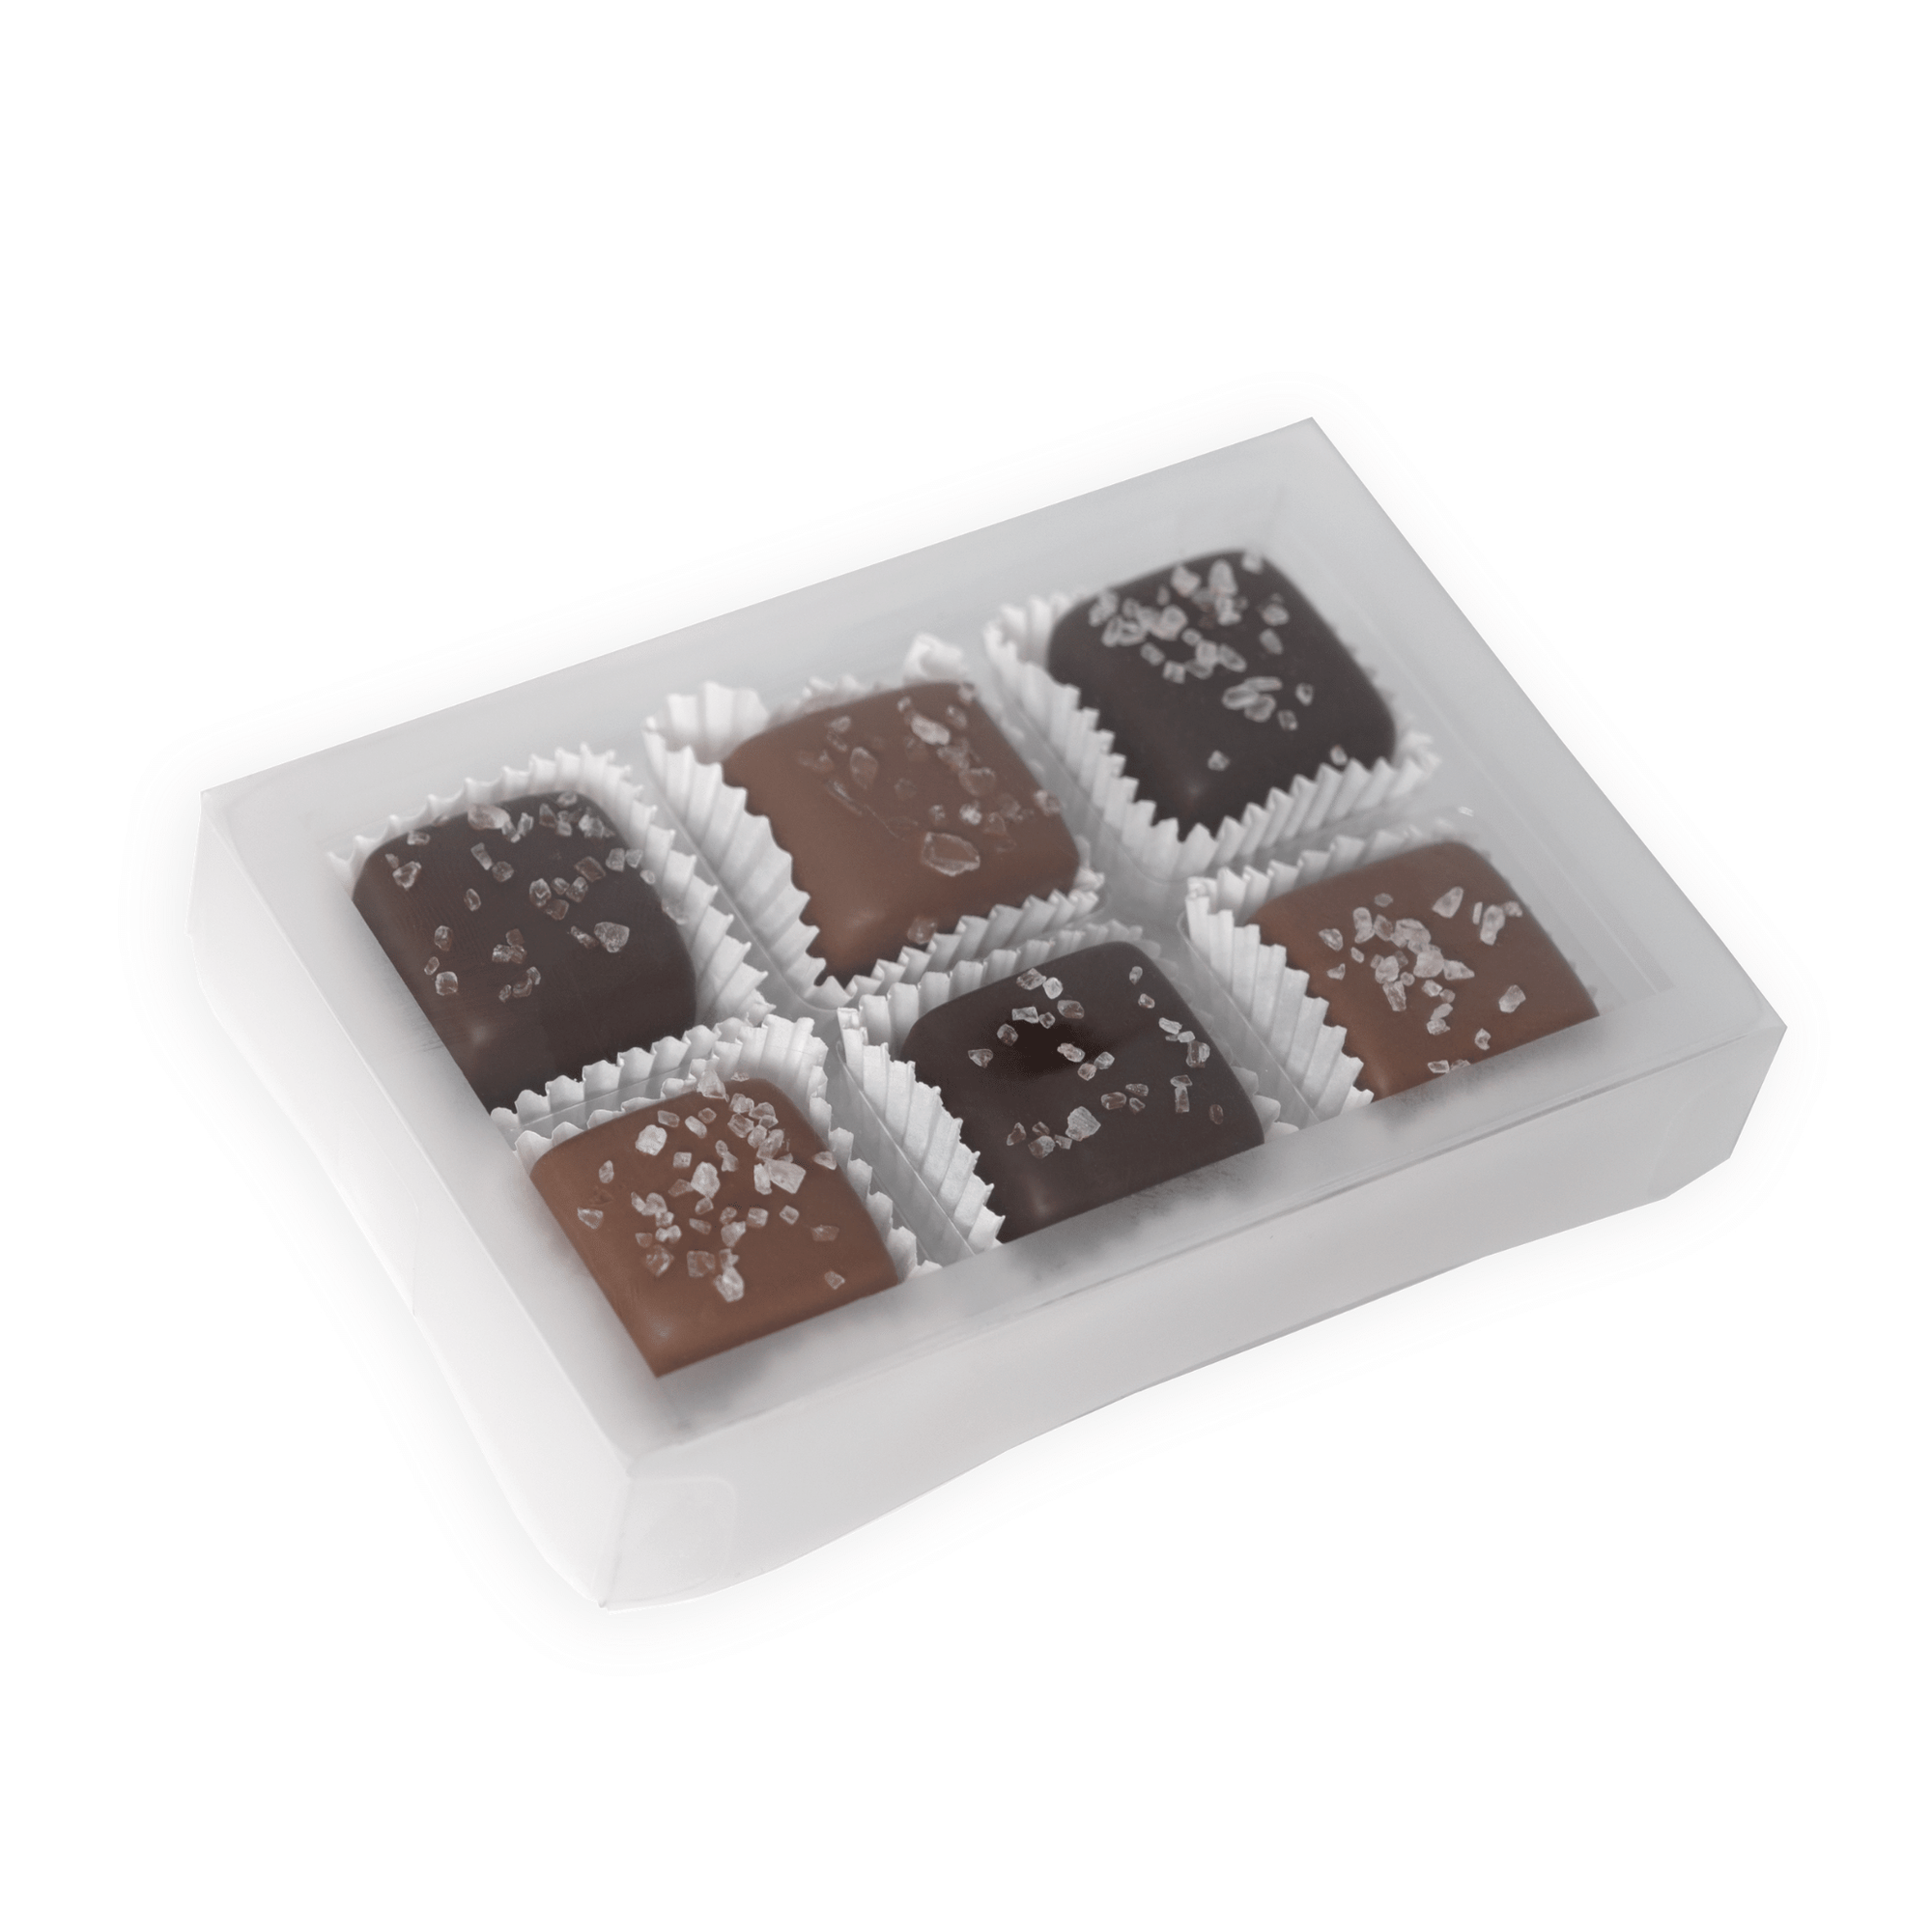 Dilettante Chocolates 6-Piece Salted Caramels in an Elegant White Gift Box